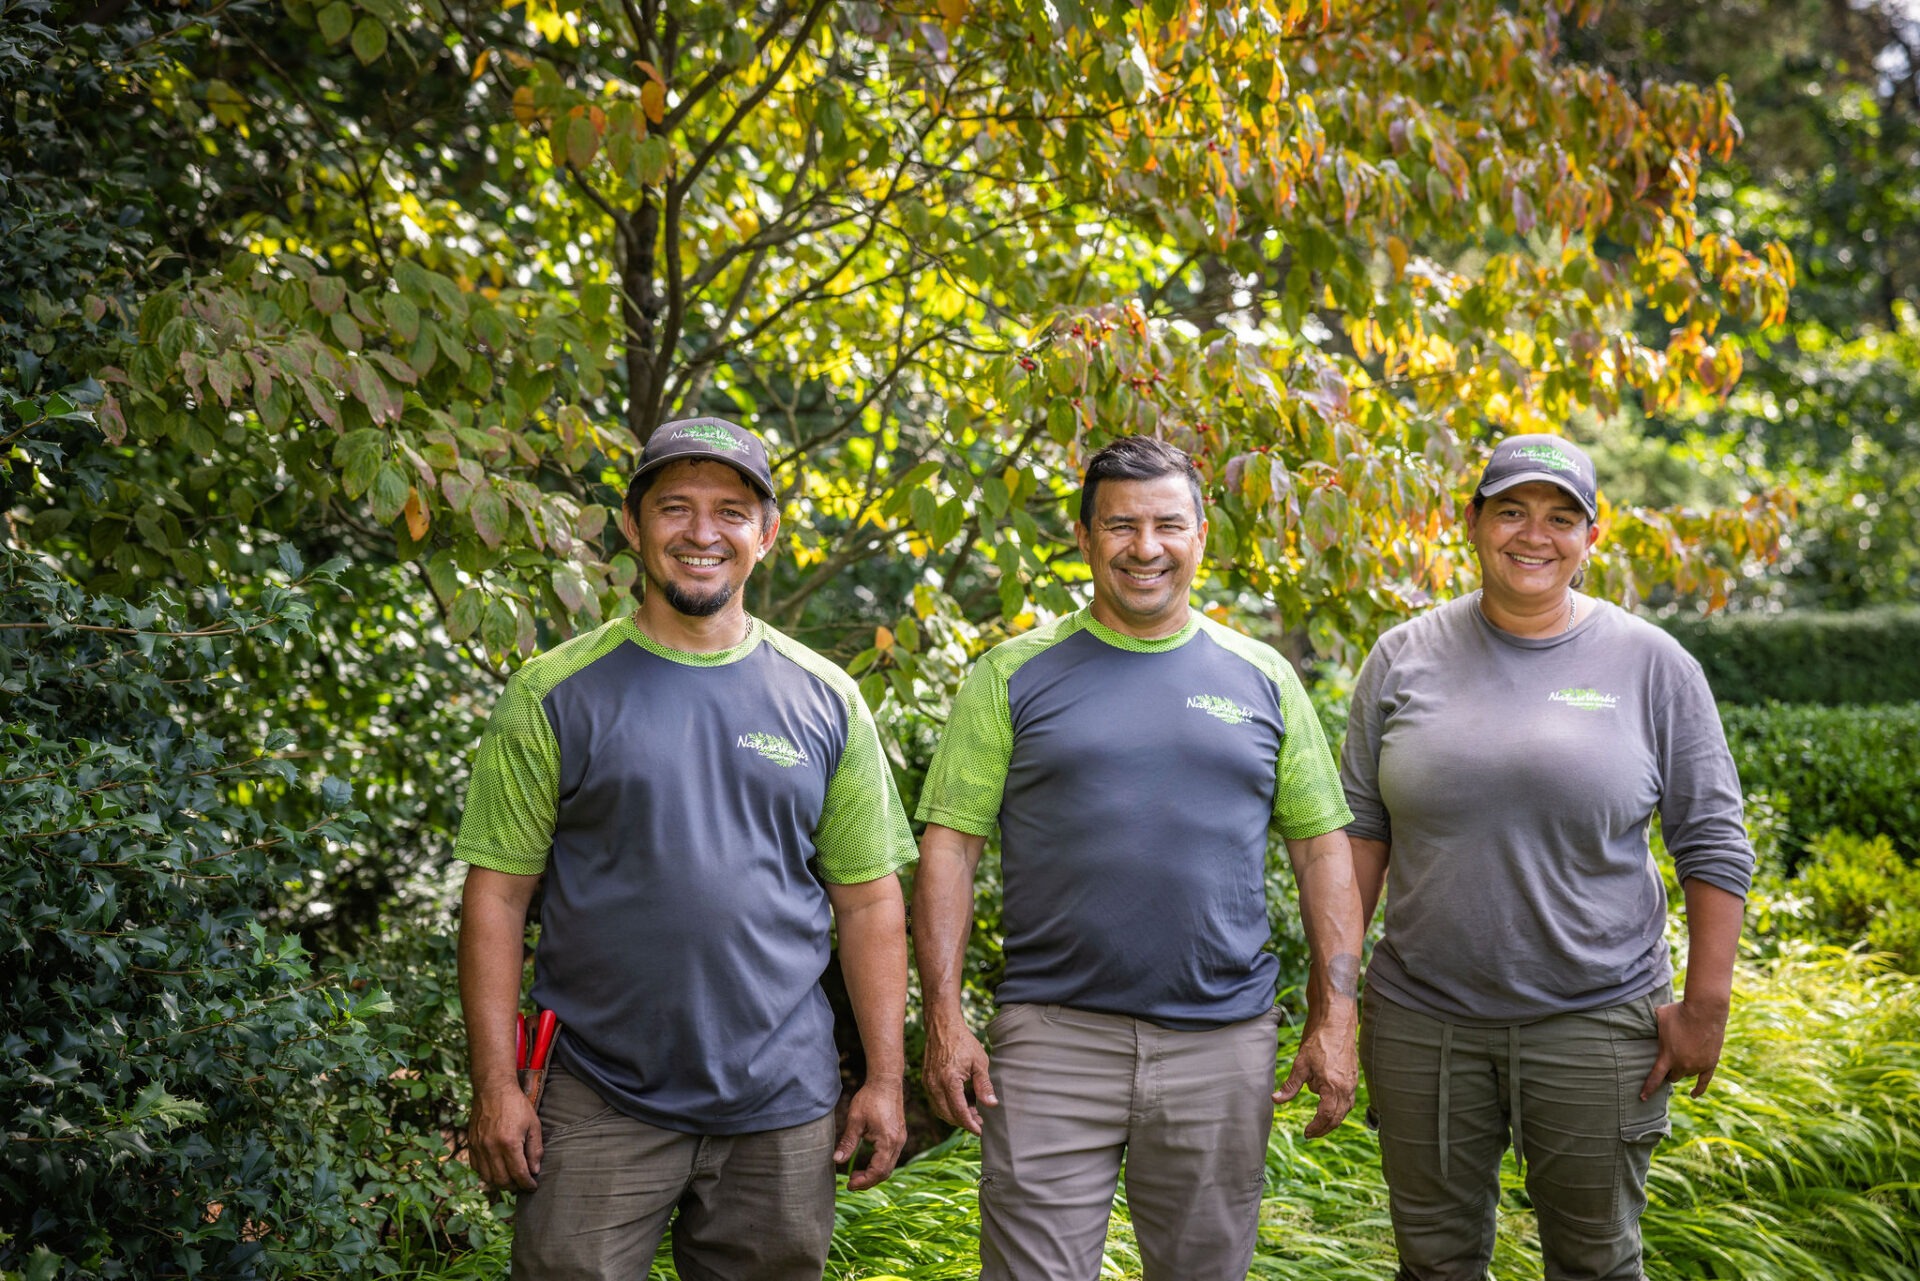 Three people in matching green work shirts stand smiling in a lush garden, exuding a sense of teamwork and professionalism amidst nature.